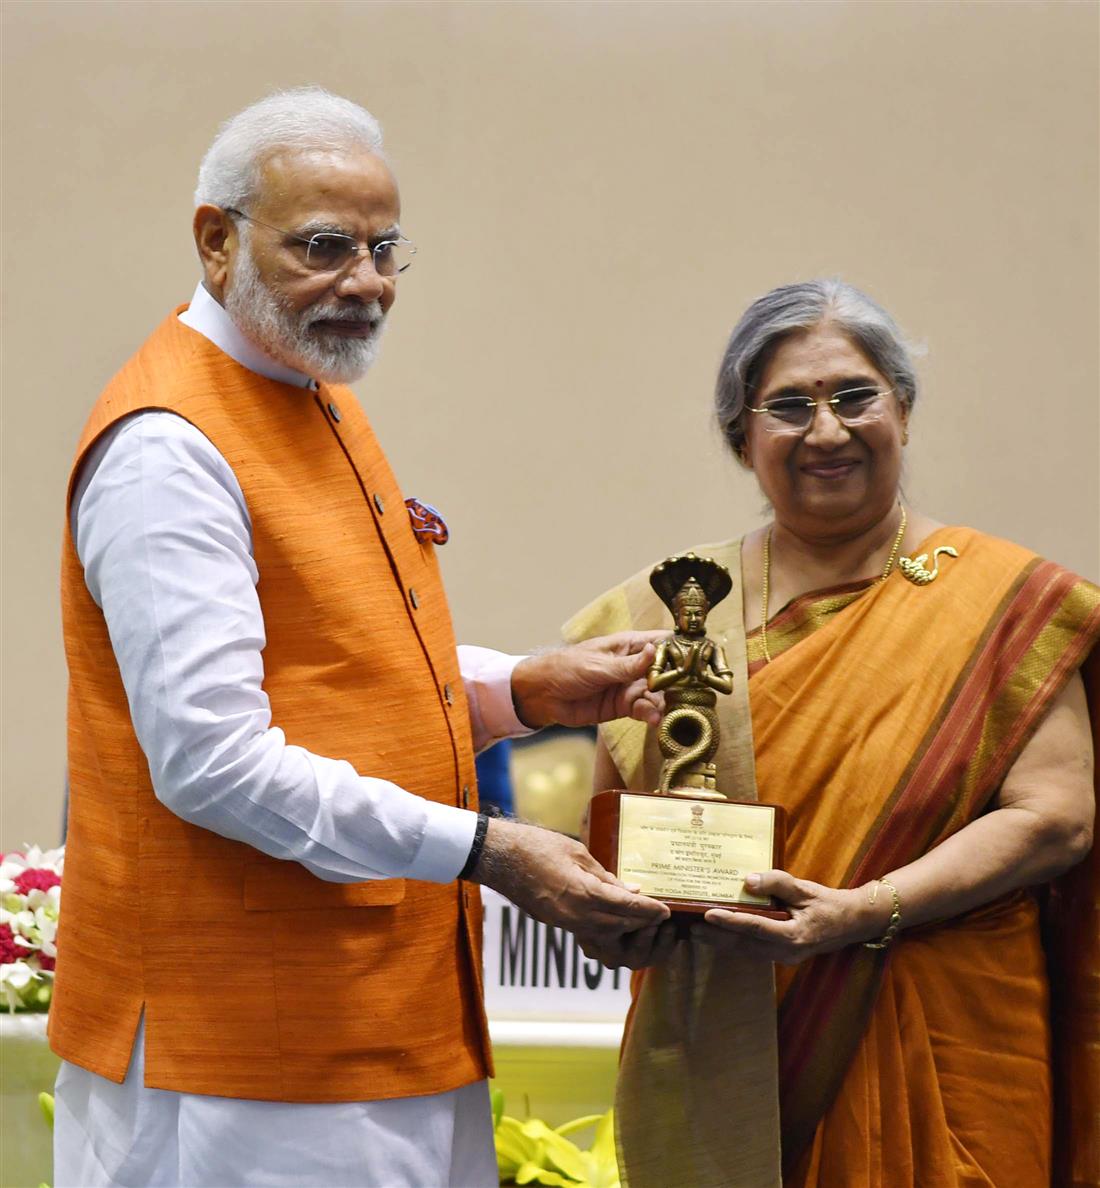 The Prime Minister, Shri Narendra Modi presenting Yoga awards to the winners of the Prime Minister’s Award for Outstanding Contribution for Promotion and Development of Yoga, at a function, in New Delhi on August 30, 2019.